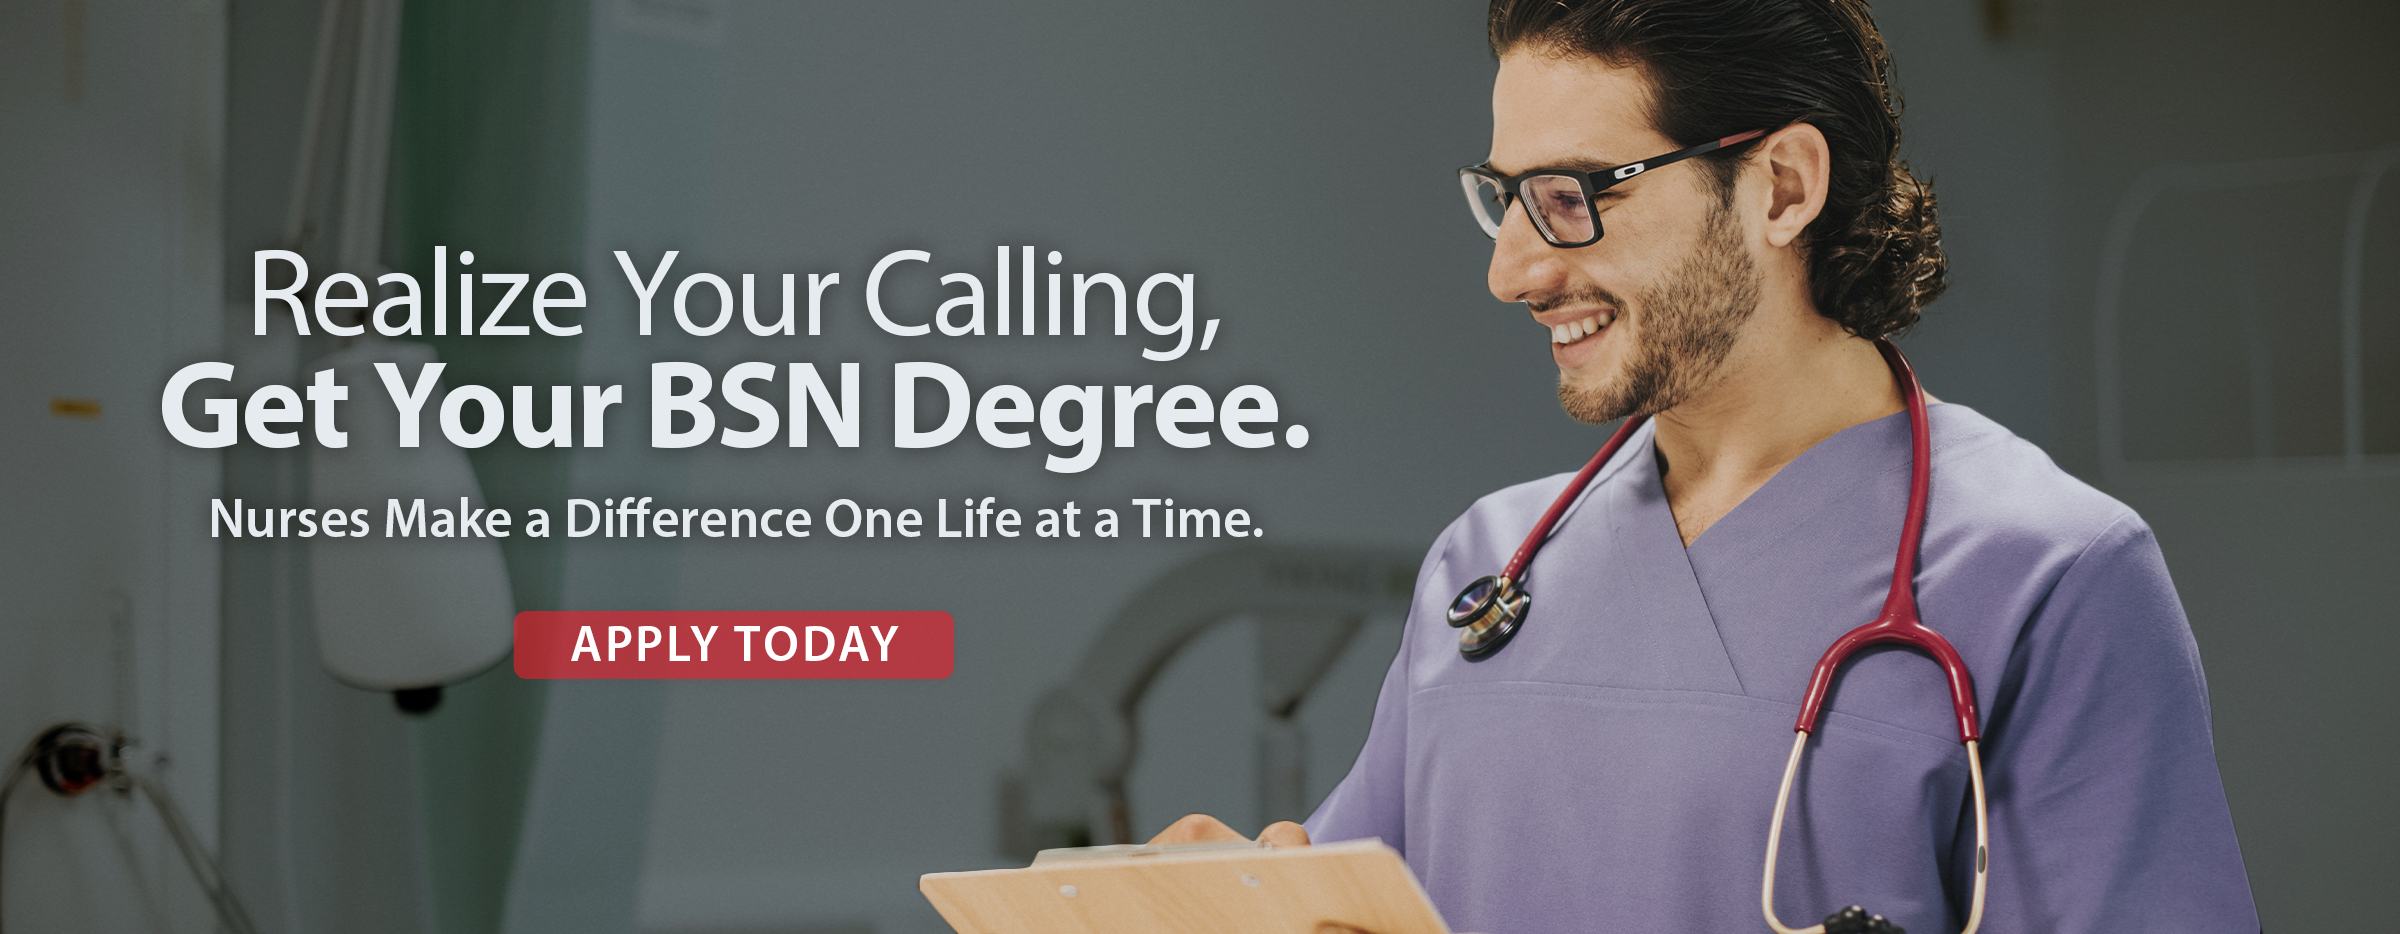 Image of Nurse. Realize Your Calling, Get Your BSN Degree. Nurses Make a Difference One Life at a Time. Apply Today.